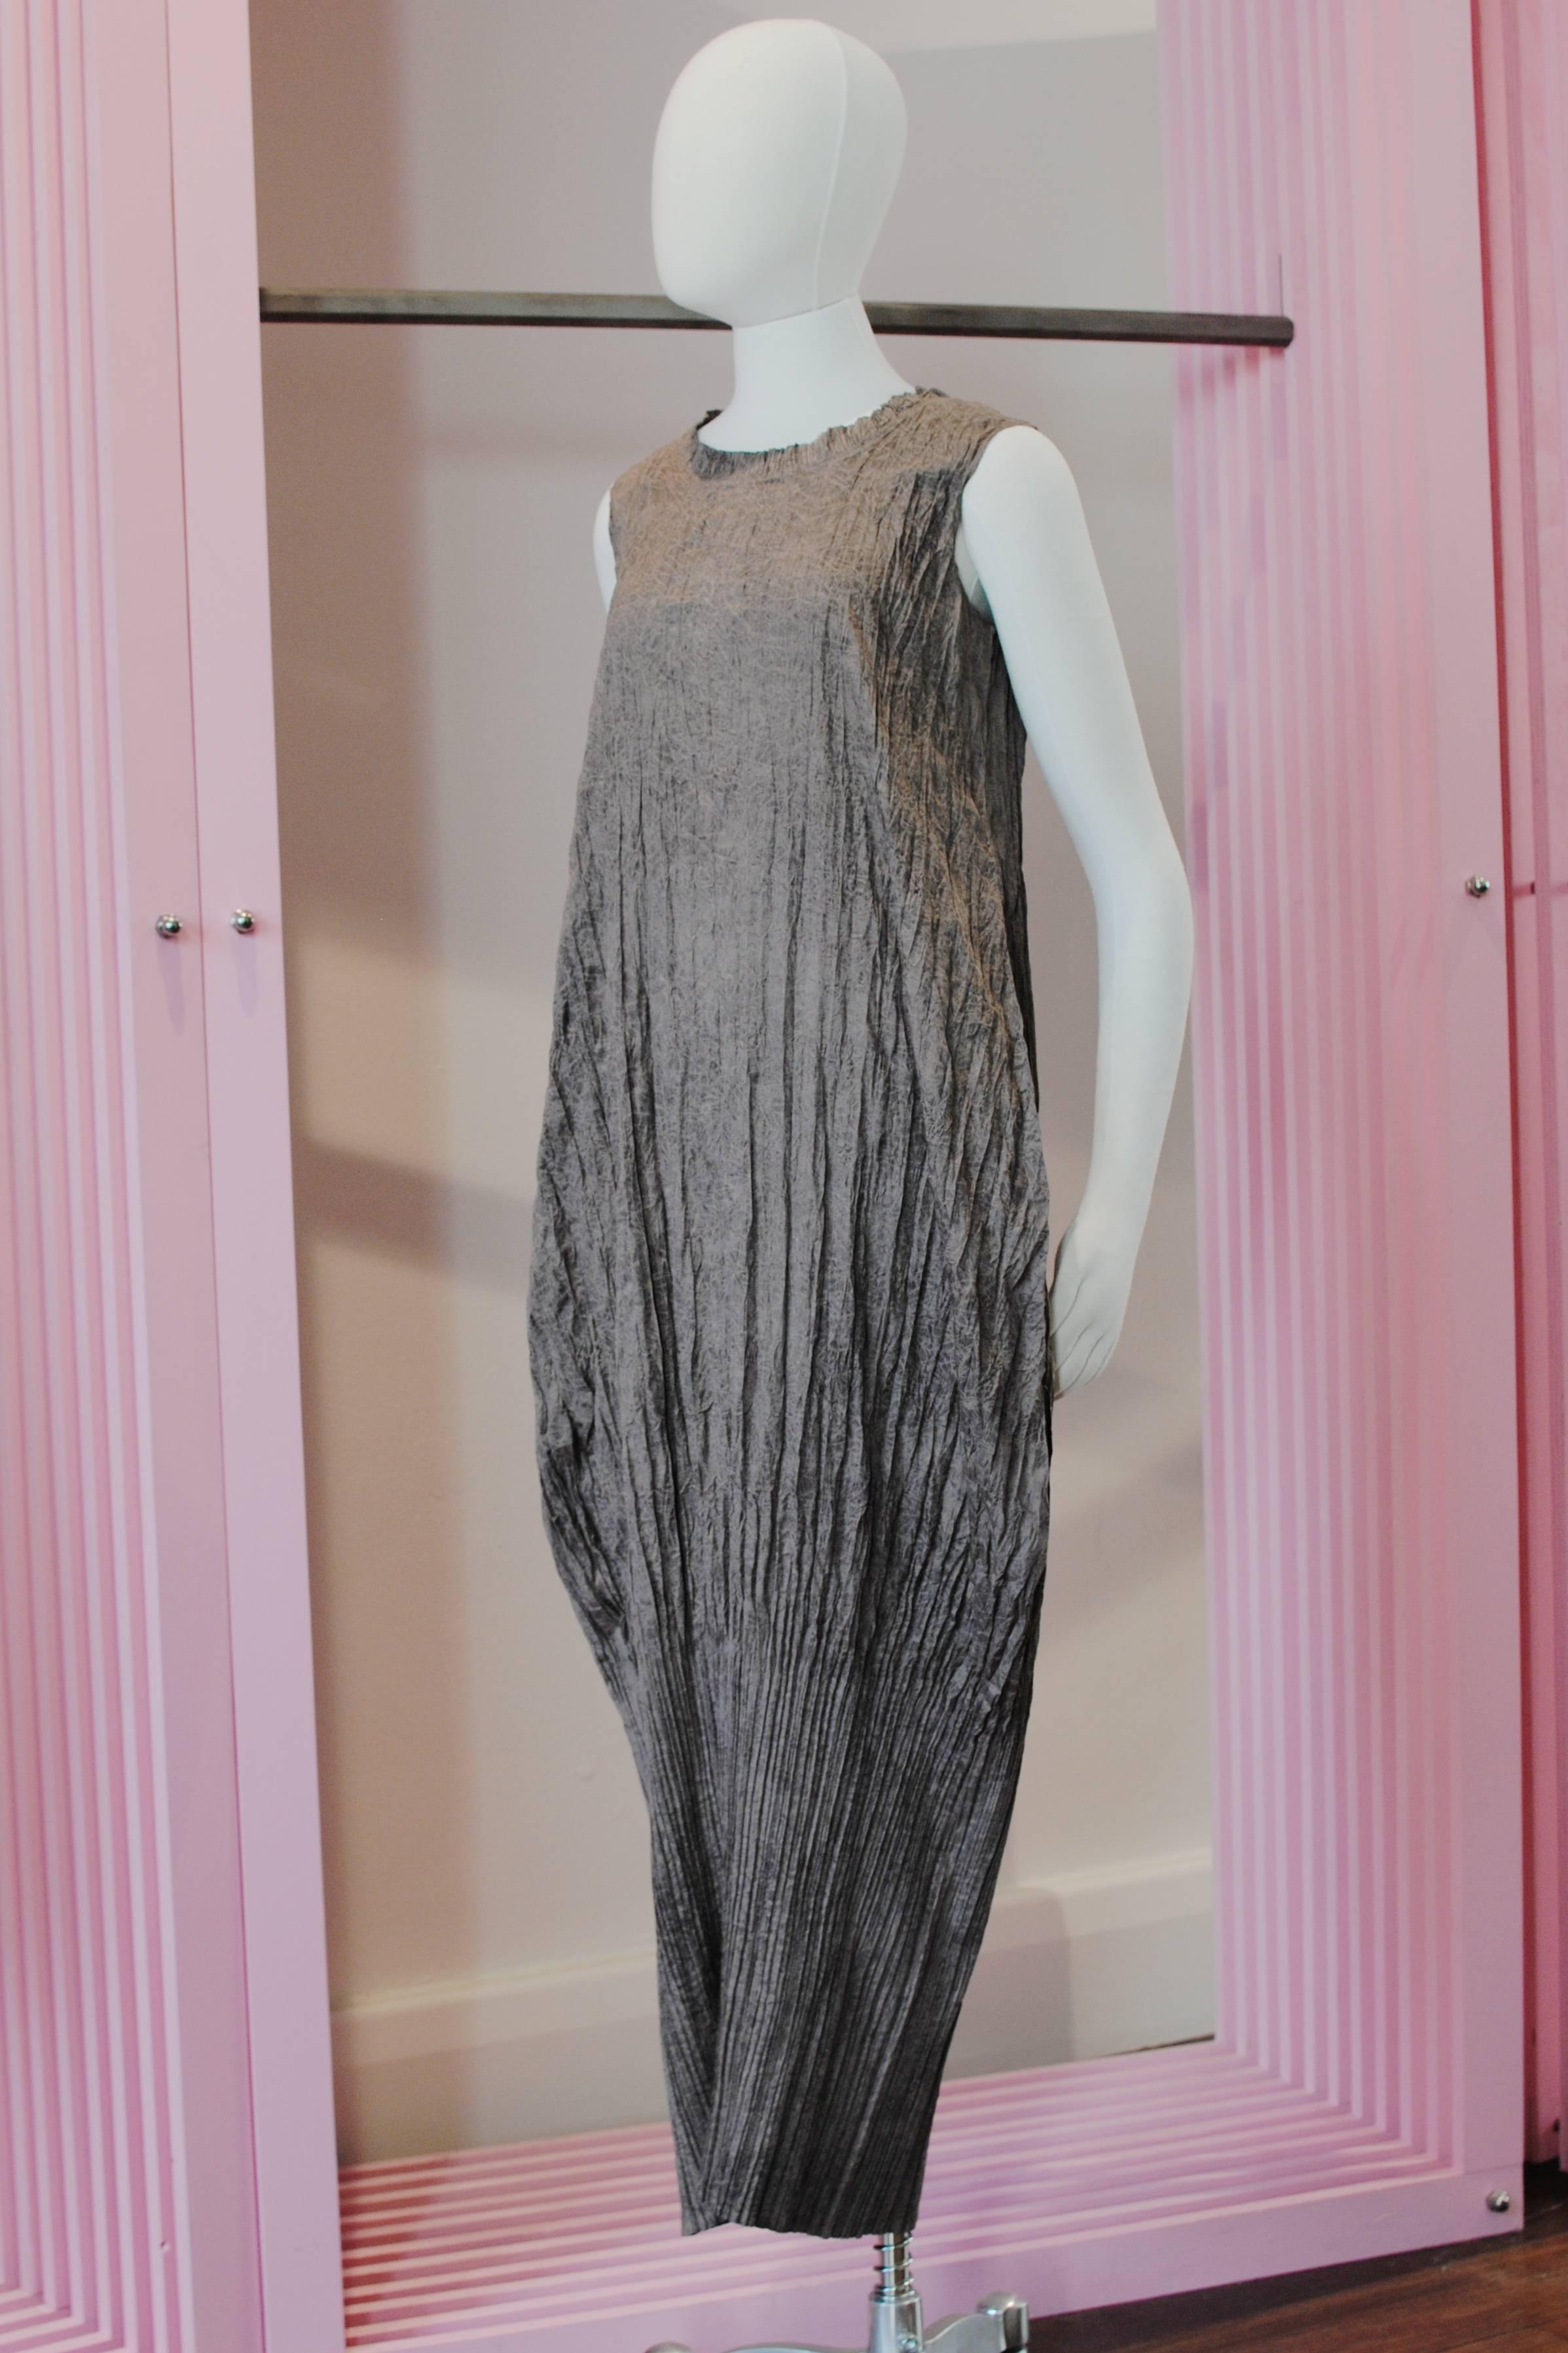 Issey Miyake pleated teardrop dress from the 2001 Autumn/Winter collection. It features a teardrop like shape and switches between pleated and creased fabric.

Size — 2
Shoulder — 35 cm
Chest — 42 cm
Length — 130 cm

Material — 100% Polyester